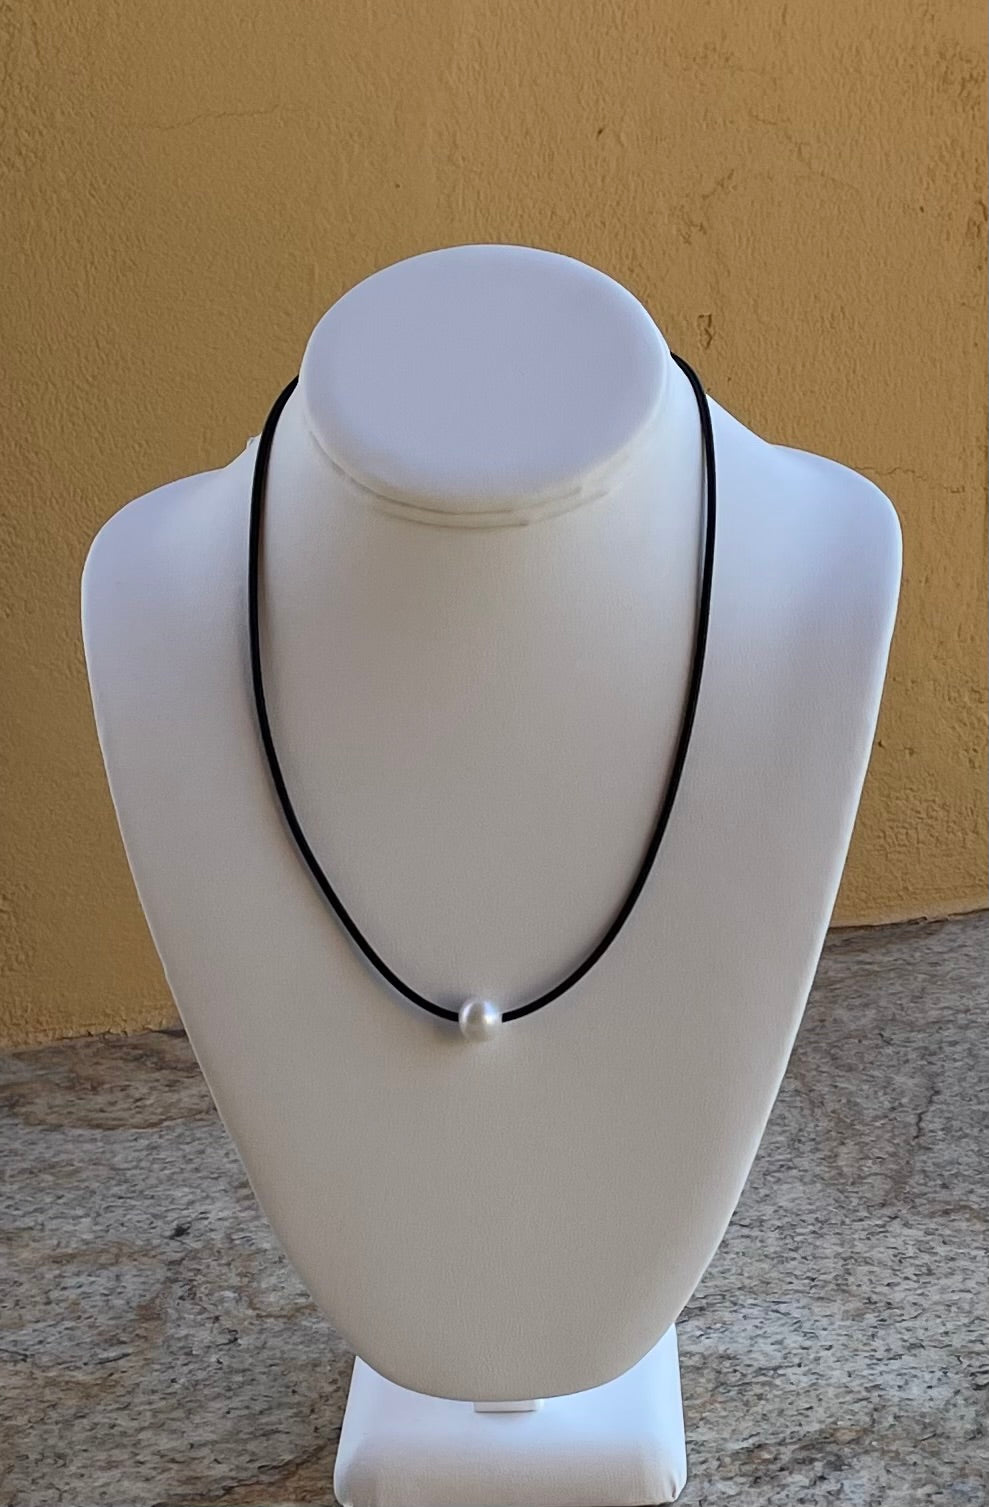 Necklace - Black rubber necklace with beautiful white round fresh water pearl